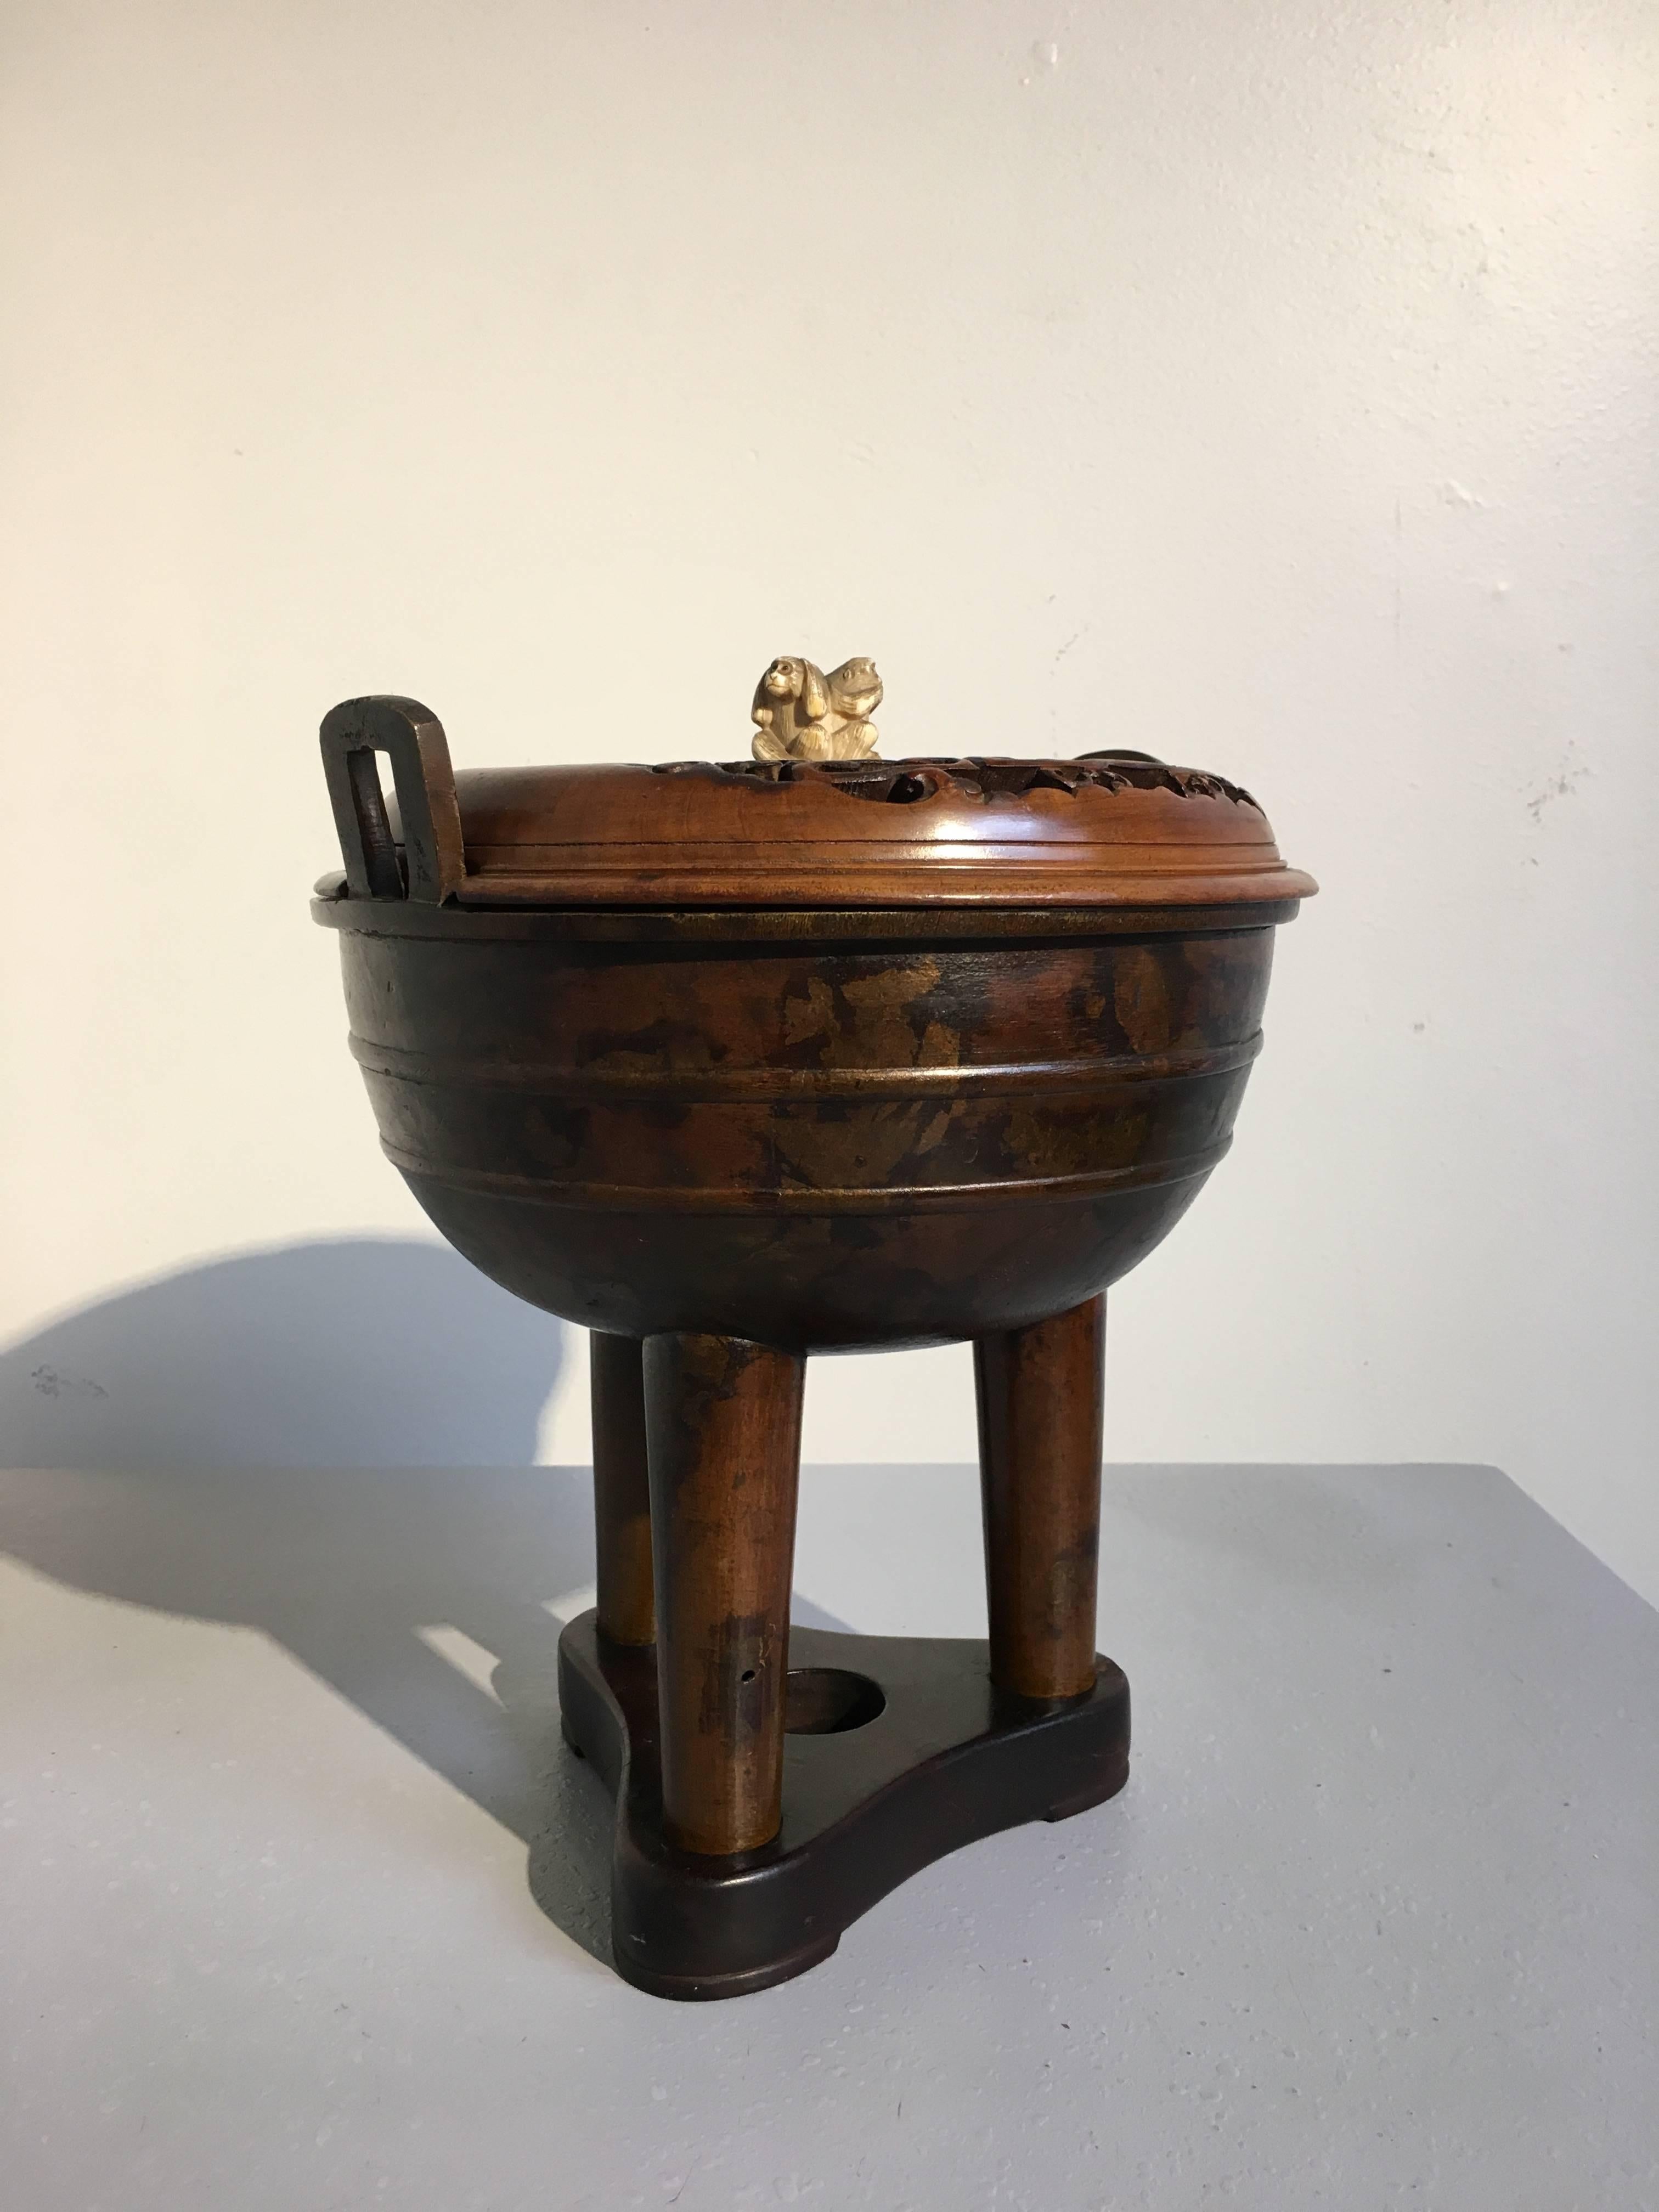 A stunning and unusual late 17th century early Qing dynasty Chinese gold splashed and lacquer patinated bronze censer in the form of an archaistic ding. The bulbous vessel sits on cylindrical tripod legs, a pair of bail handles rising from the rim.